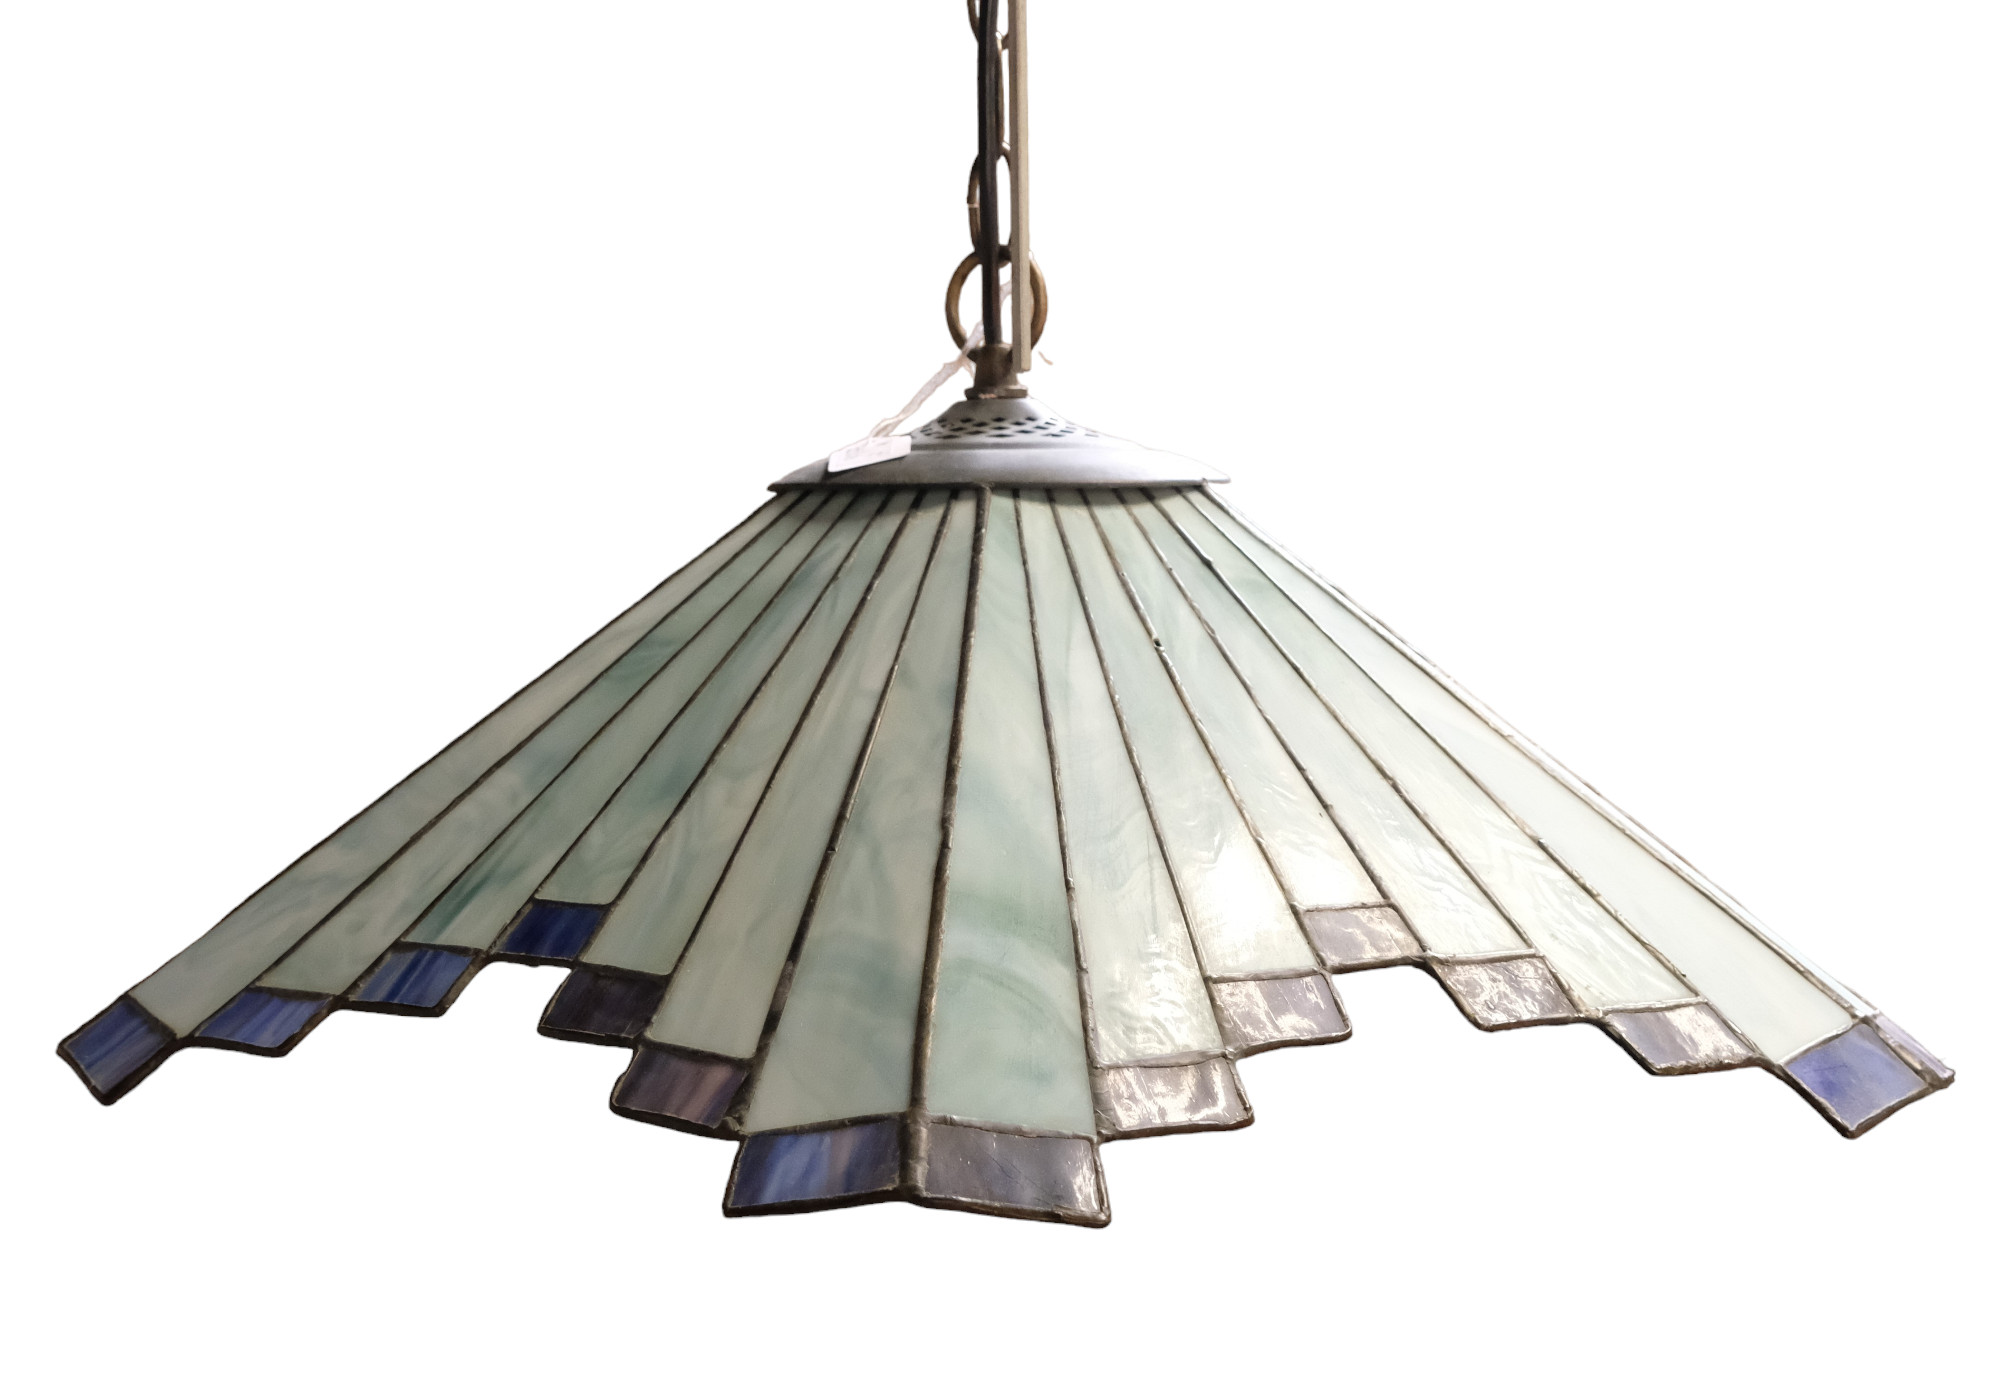 A pair of Tiffany-style lead glass pendant light fittings, 55.5 cm diameter - Image 2 of 3